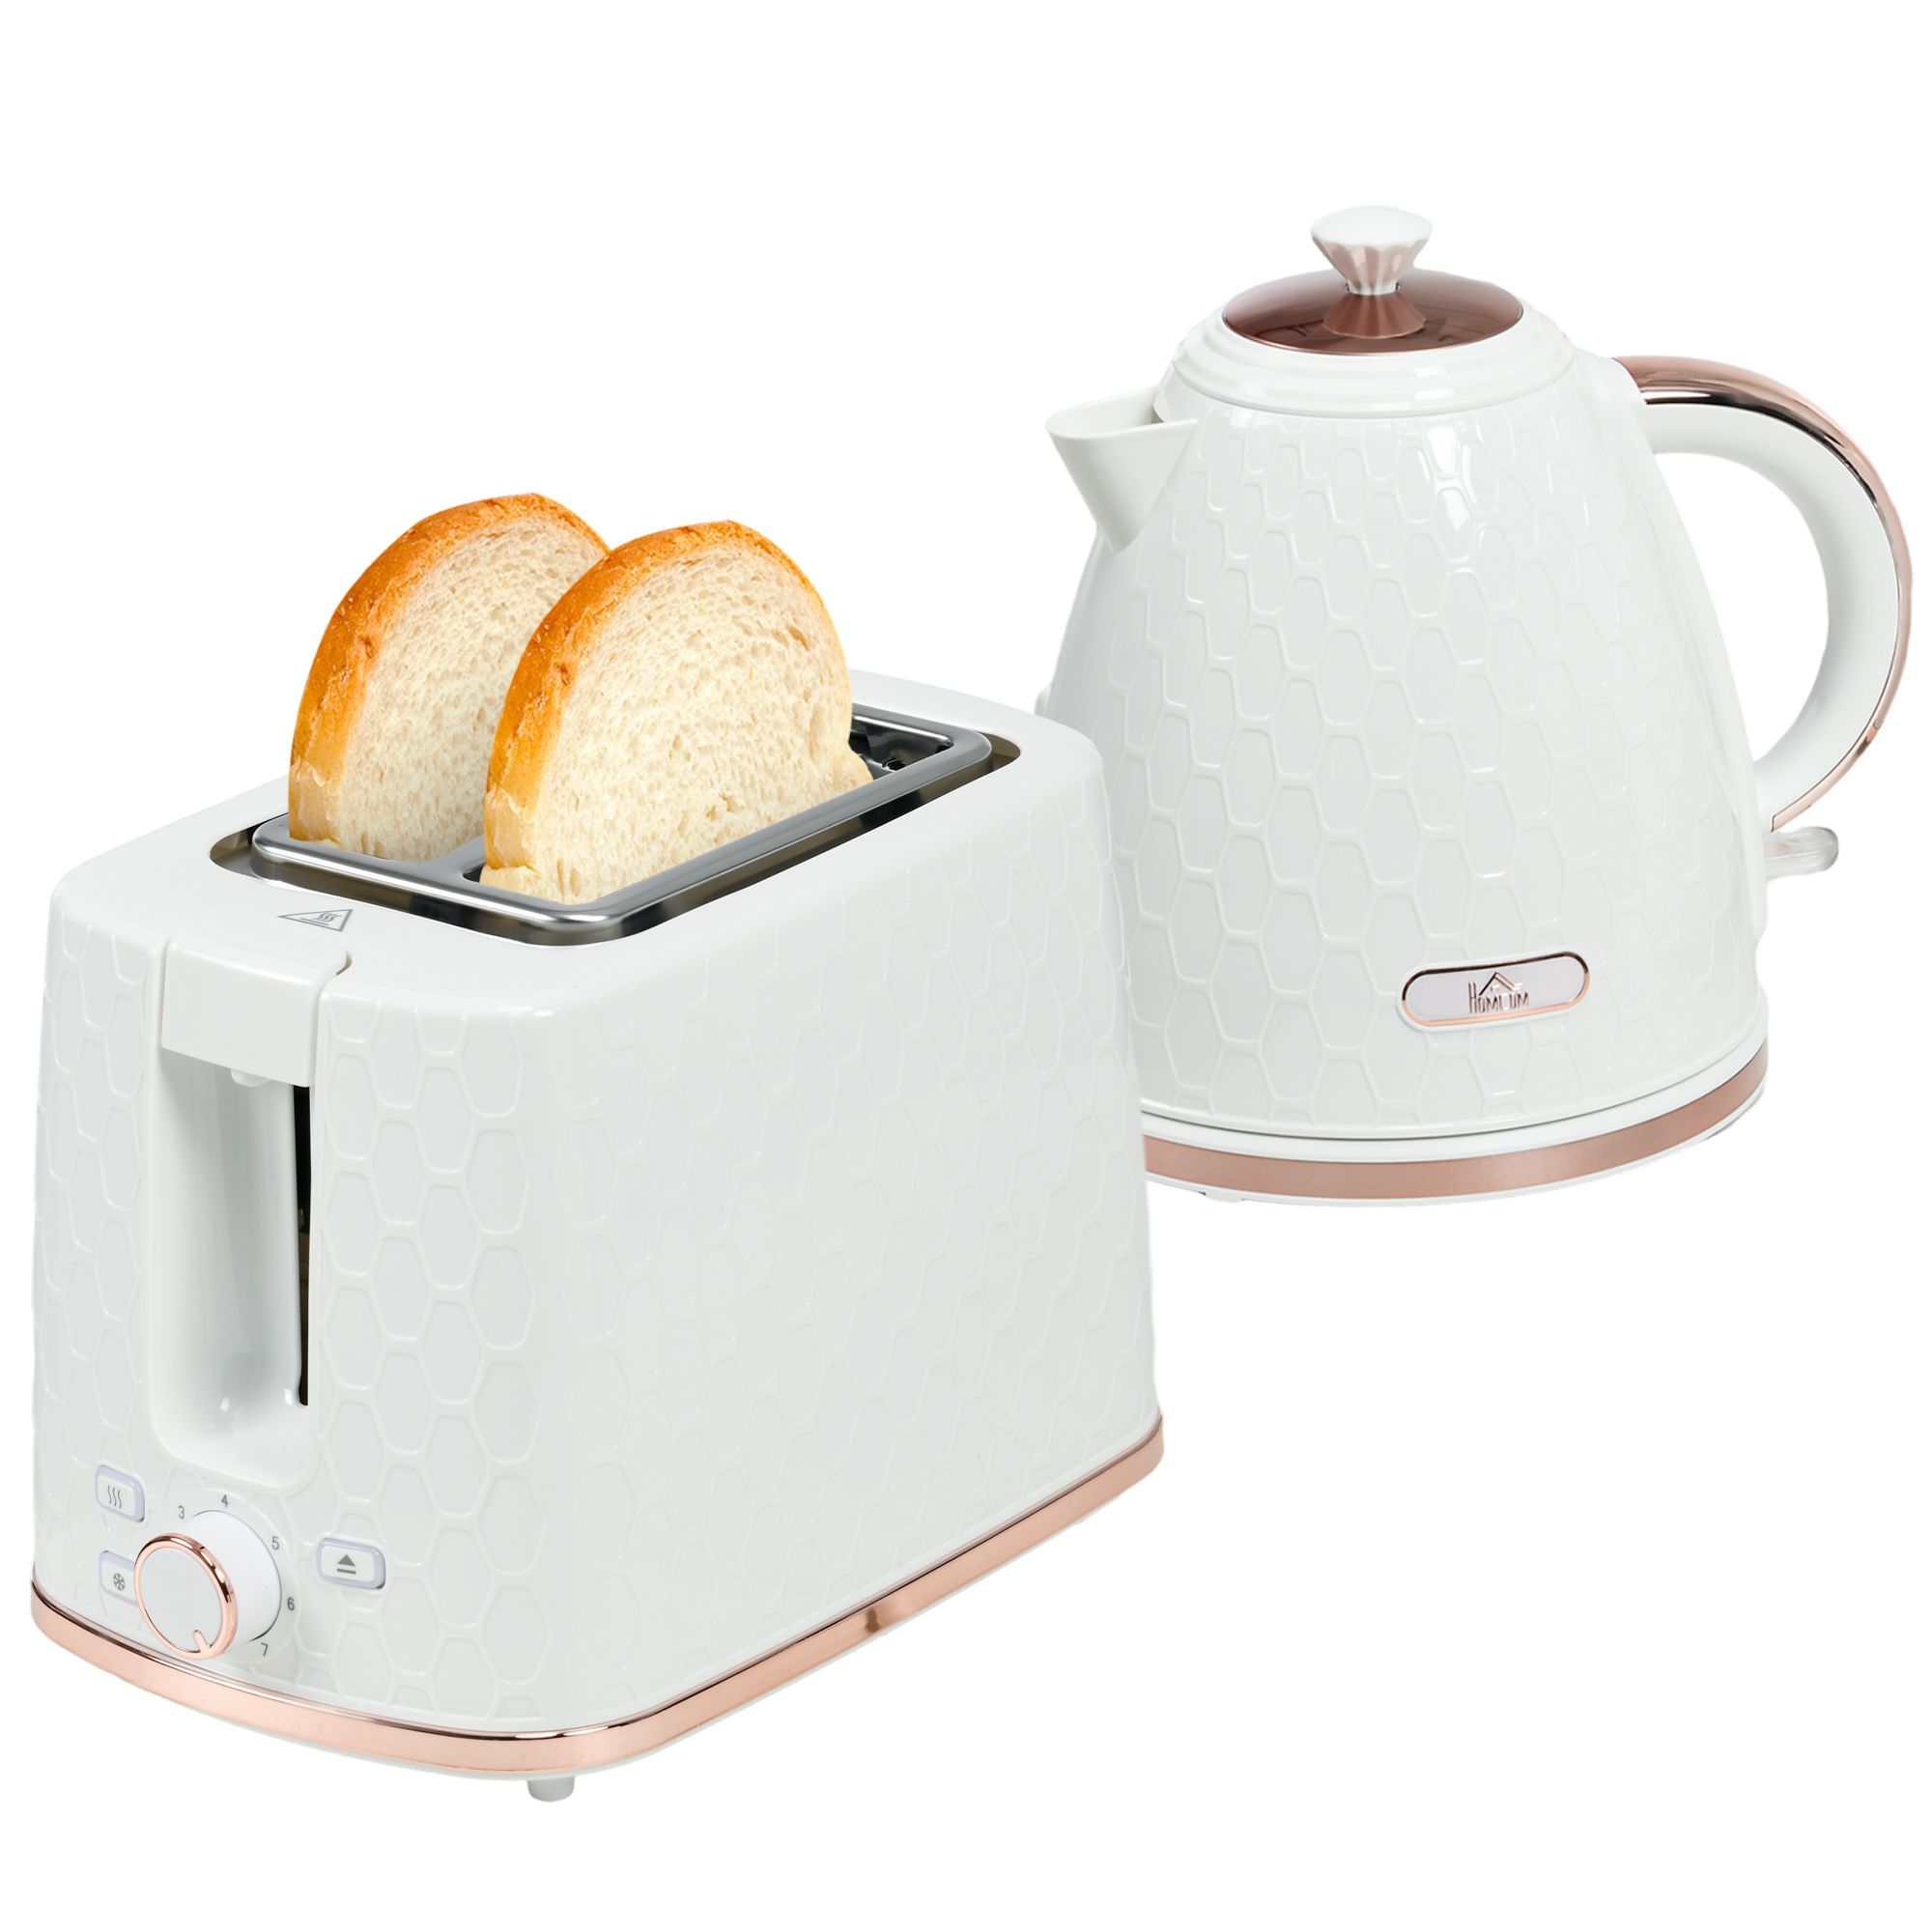 Homcom 1.7l 3000w Fast Boil Kettle & 2 Slice Toaster Set, Kettle And Toaster Set With Auto Shut Off, Browning Controls, White